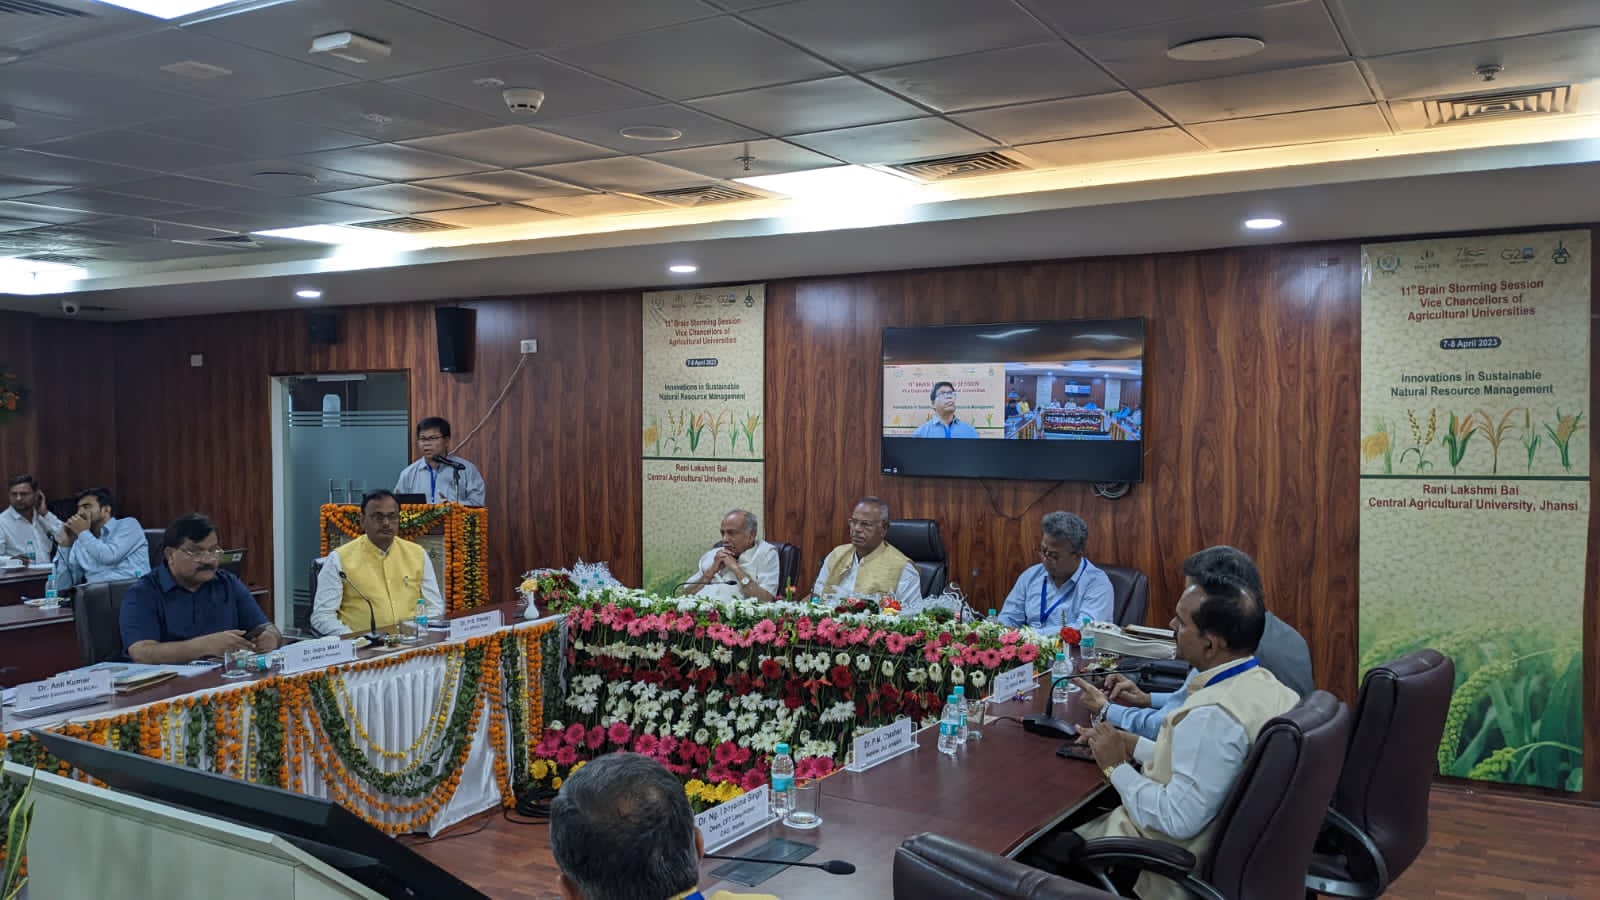 Hon’ble Vice-Chancellor Dr Anupam Mishra Co-chaired a session on “Introducing Innovations (Including AI, IoTs, Block Chain, Agri-Drone, Blended Learning” during the ongoing 11th Brain Storming Session of the Vice Chancellor’s of Agricultural Universities at RLBCAU, Jhansi (7 to 8 April, 2023)